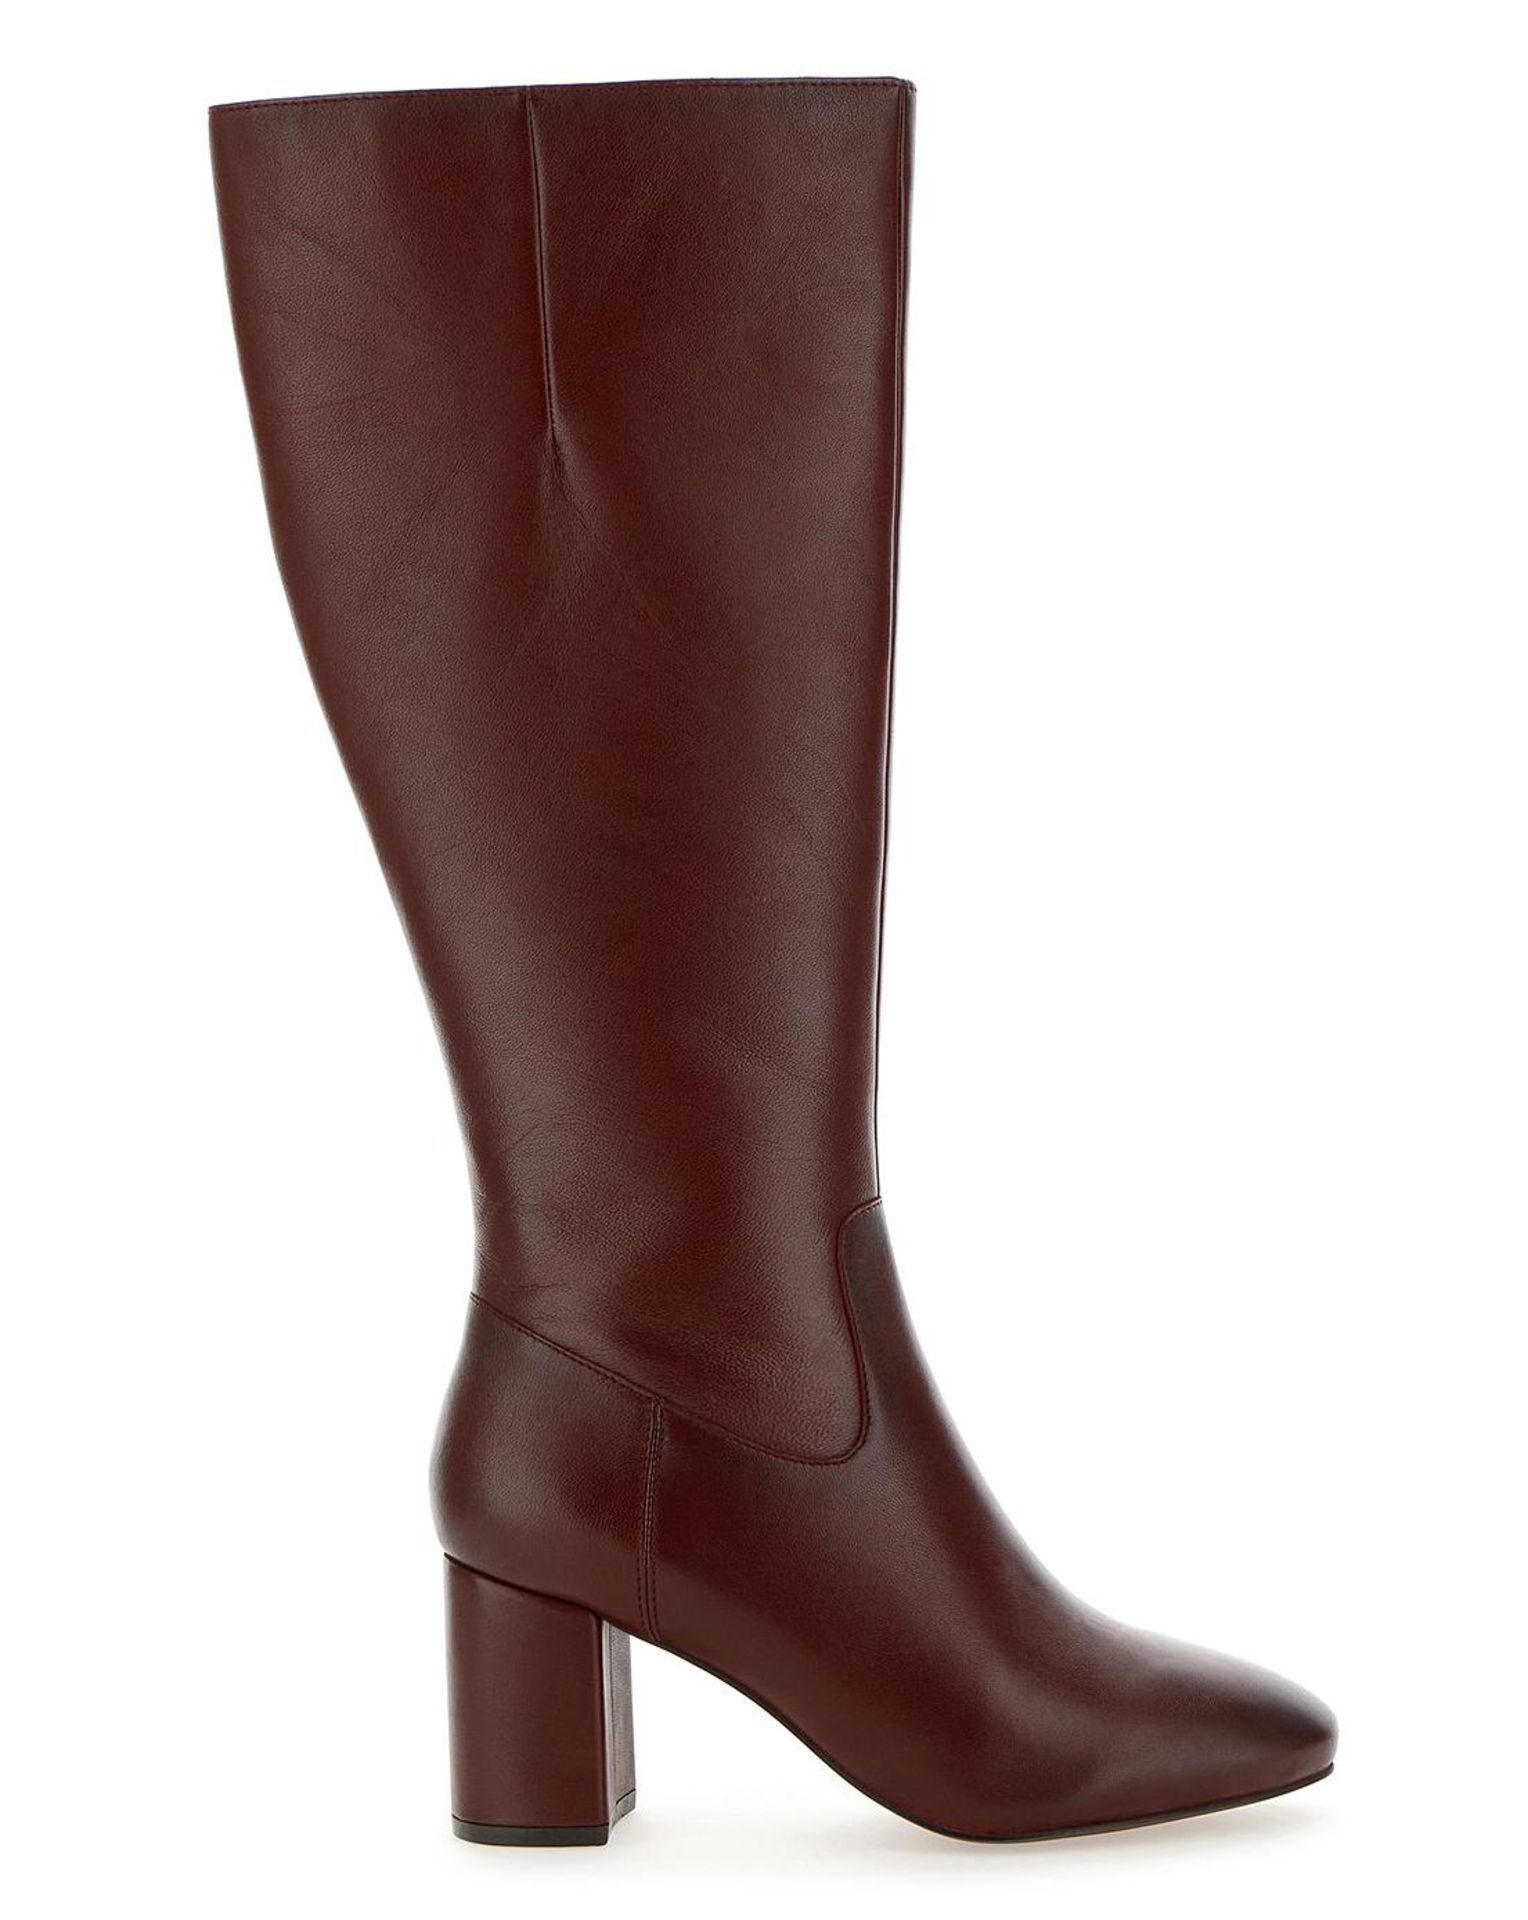 Leather High Leg Boots Extra Wide EEE Fit Curvy Calf Width SIZE 4 RRP £75Condition ReportAppraisal